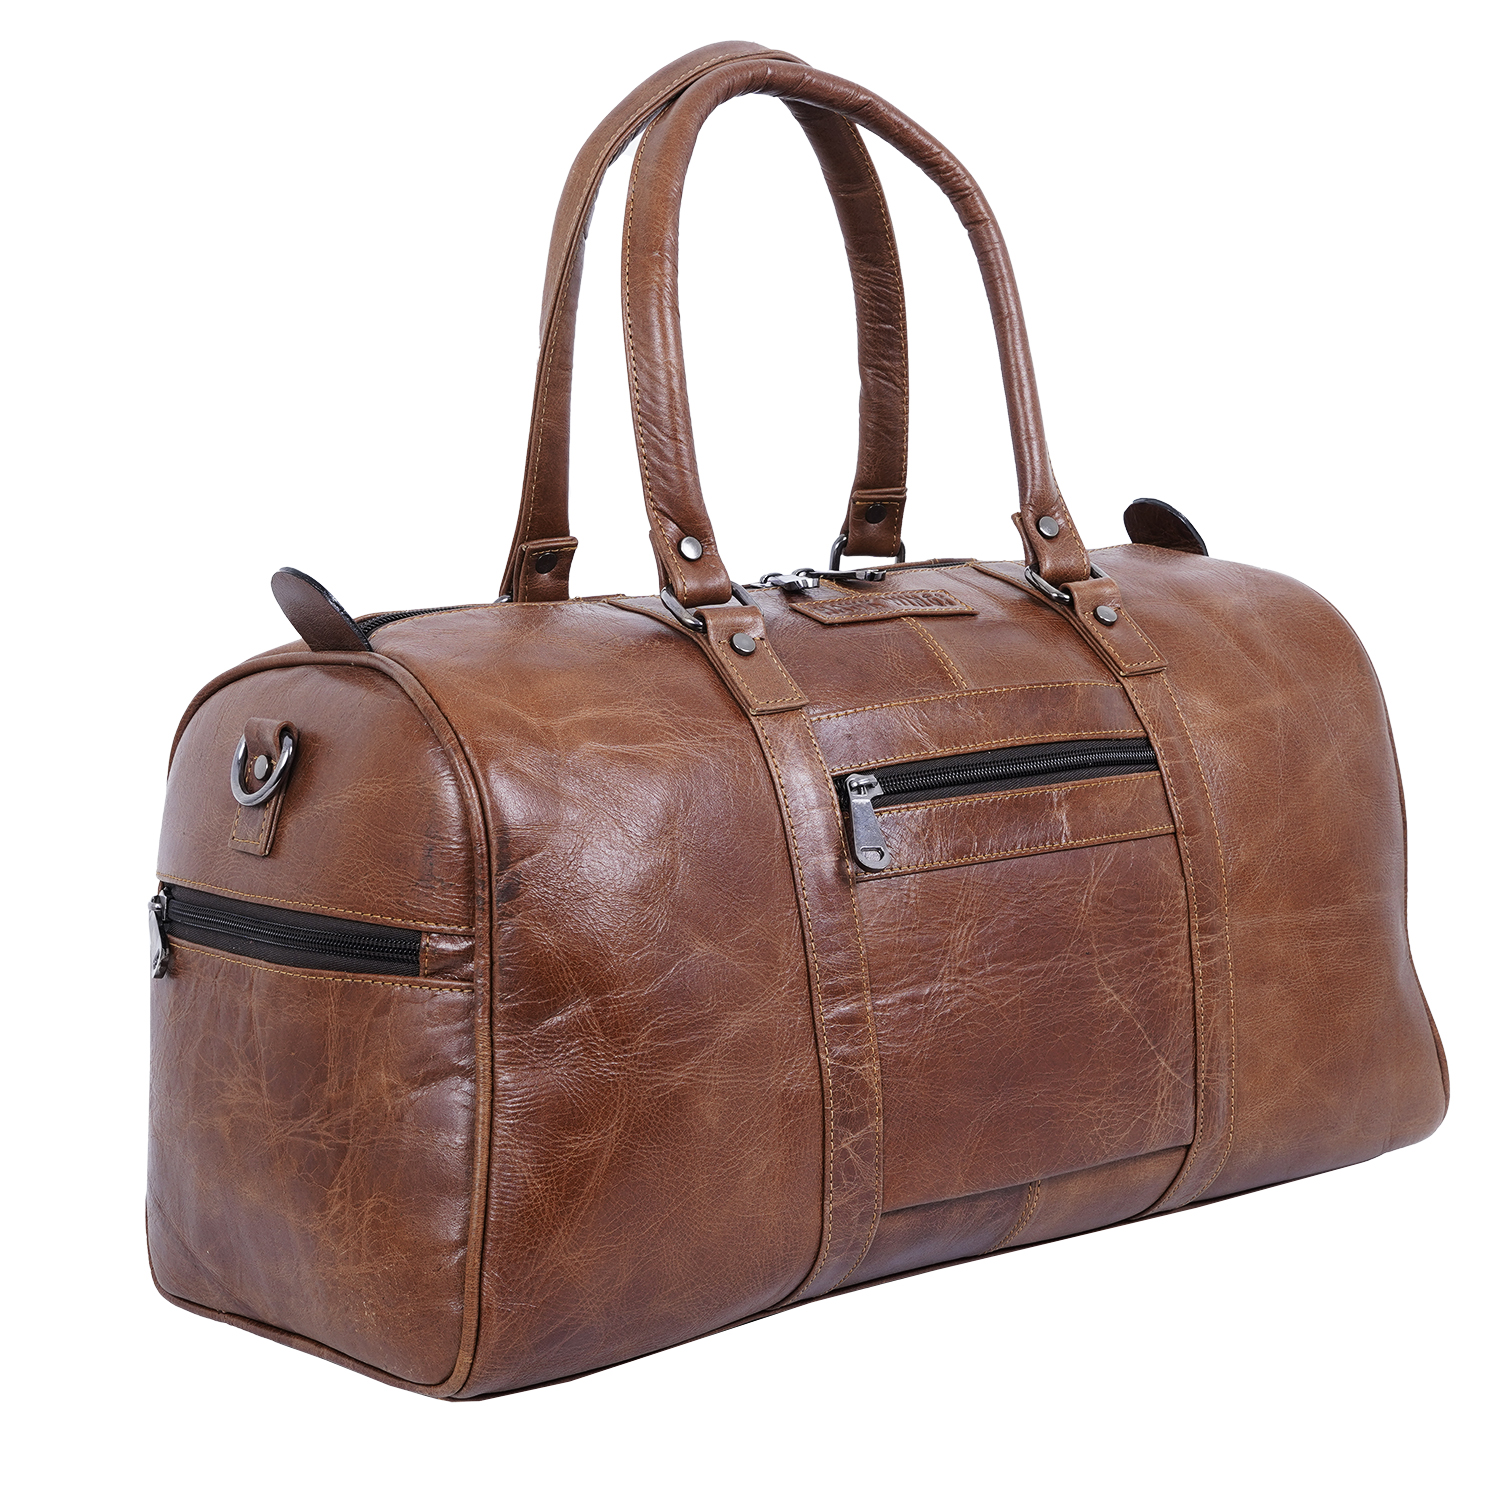 Leather Travel Duffle Bag for Men Women - Leather Duffel Carry on Overnight Weekender Bags (Crunch Tan)-asset-188